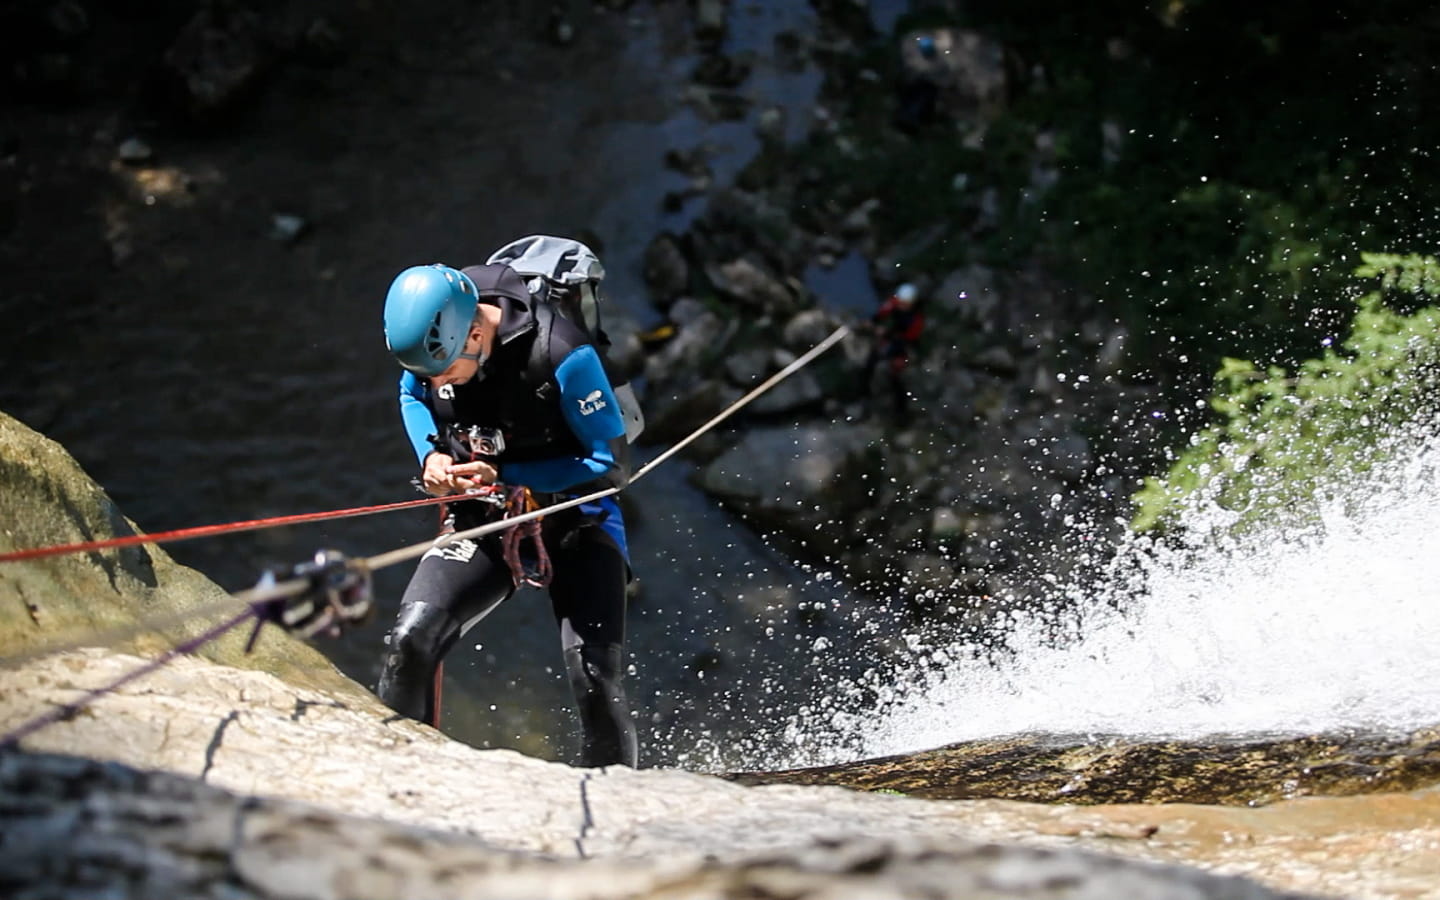 Journée Canyoning Noaguides